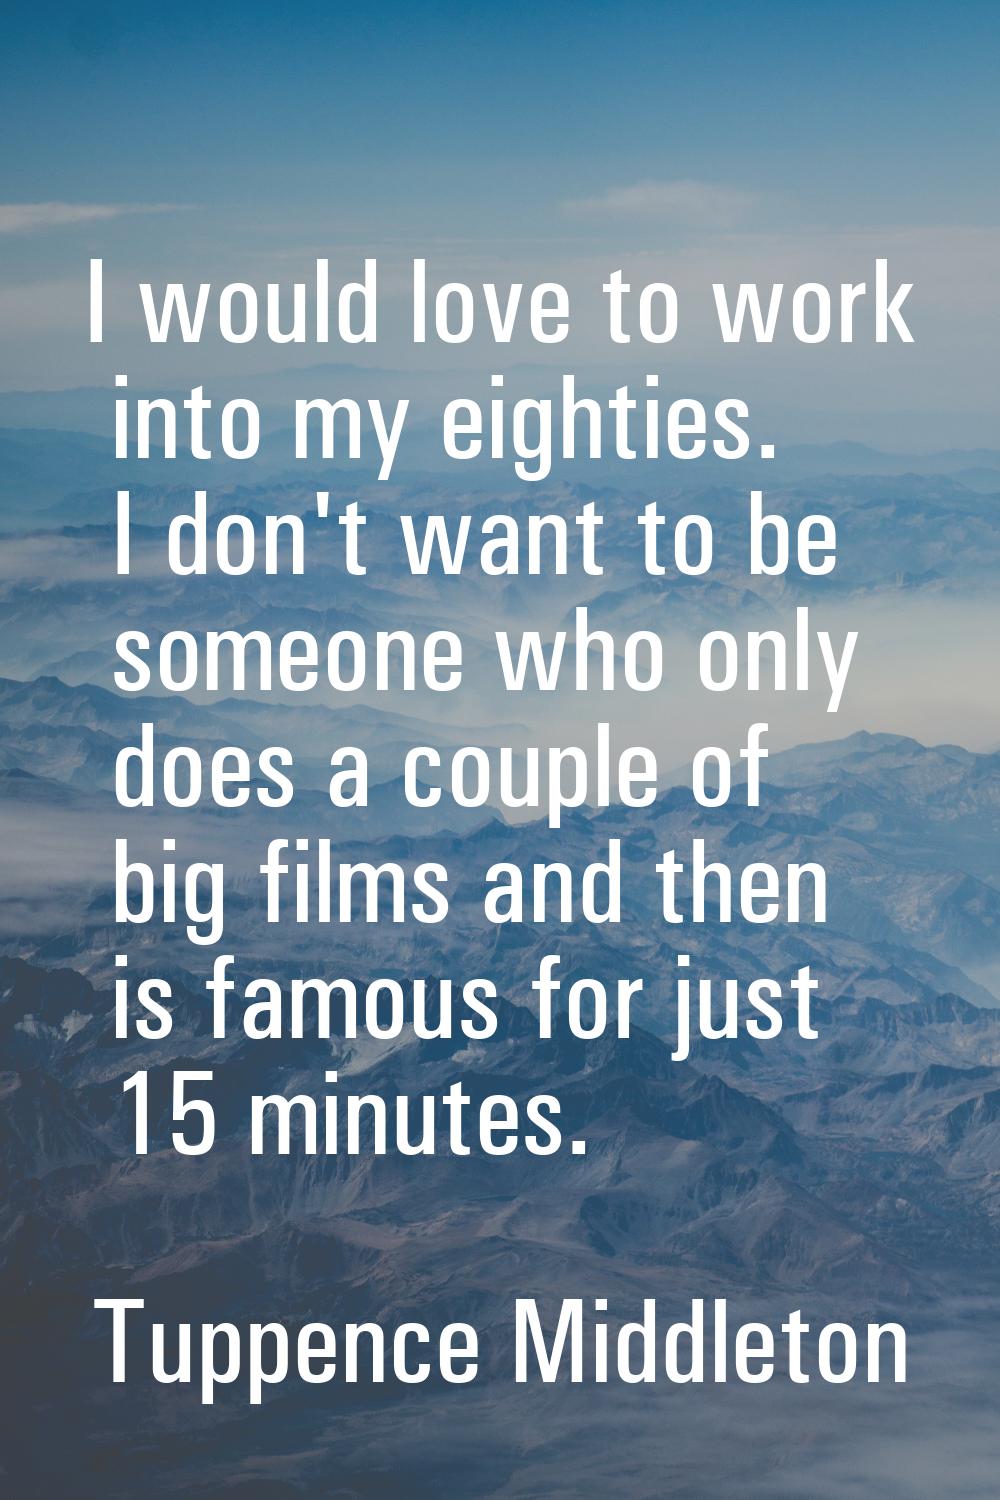 I would love to work into my eighties. I don't want to be someone who only does a couple of big fil